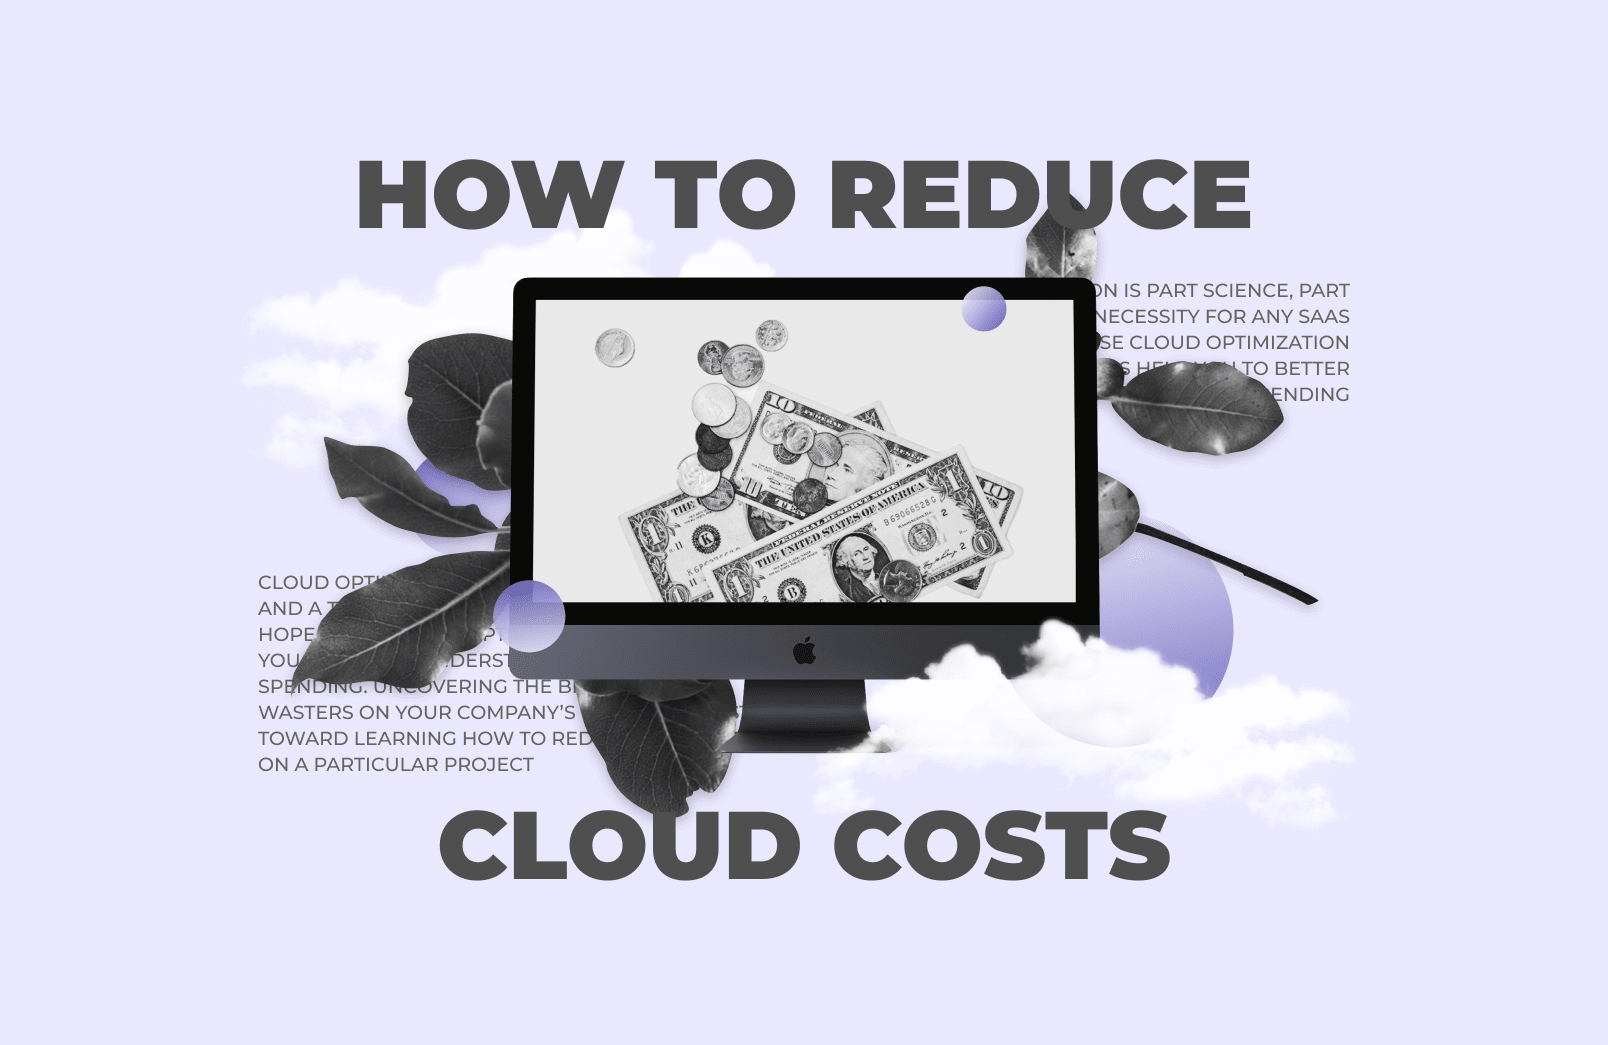 How to reduce cloud costs